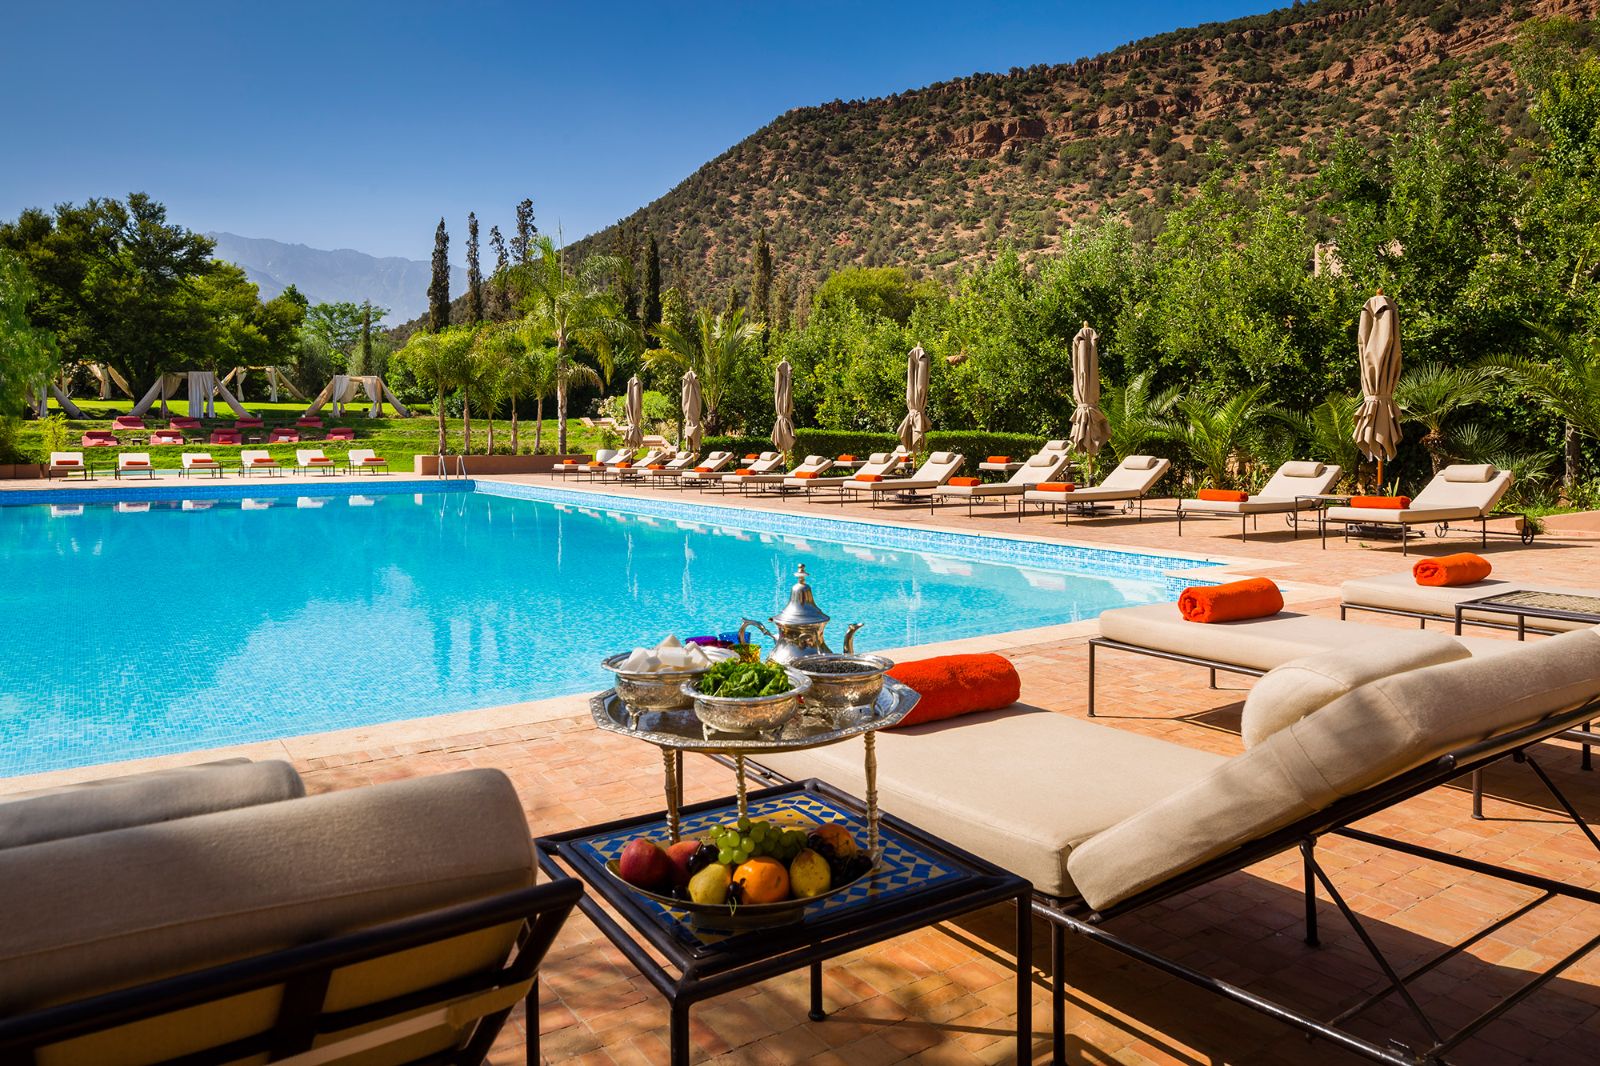 Swimming pool at Kasbah Tamadot in the Atlas Mountains of Morocco